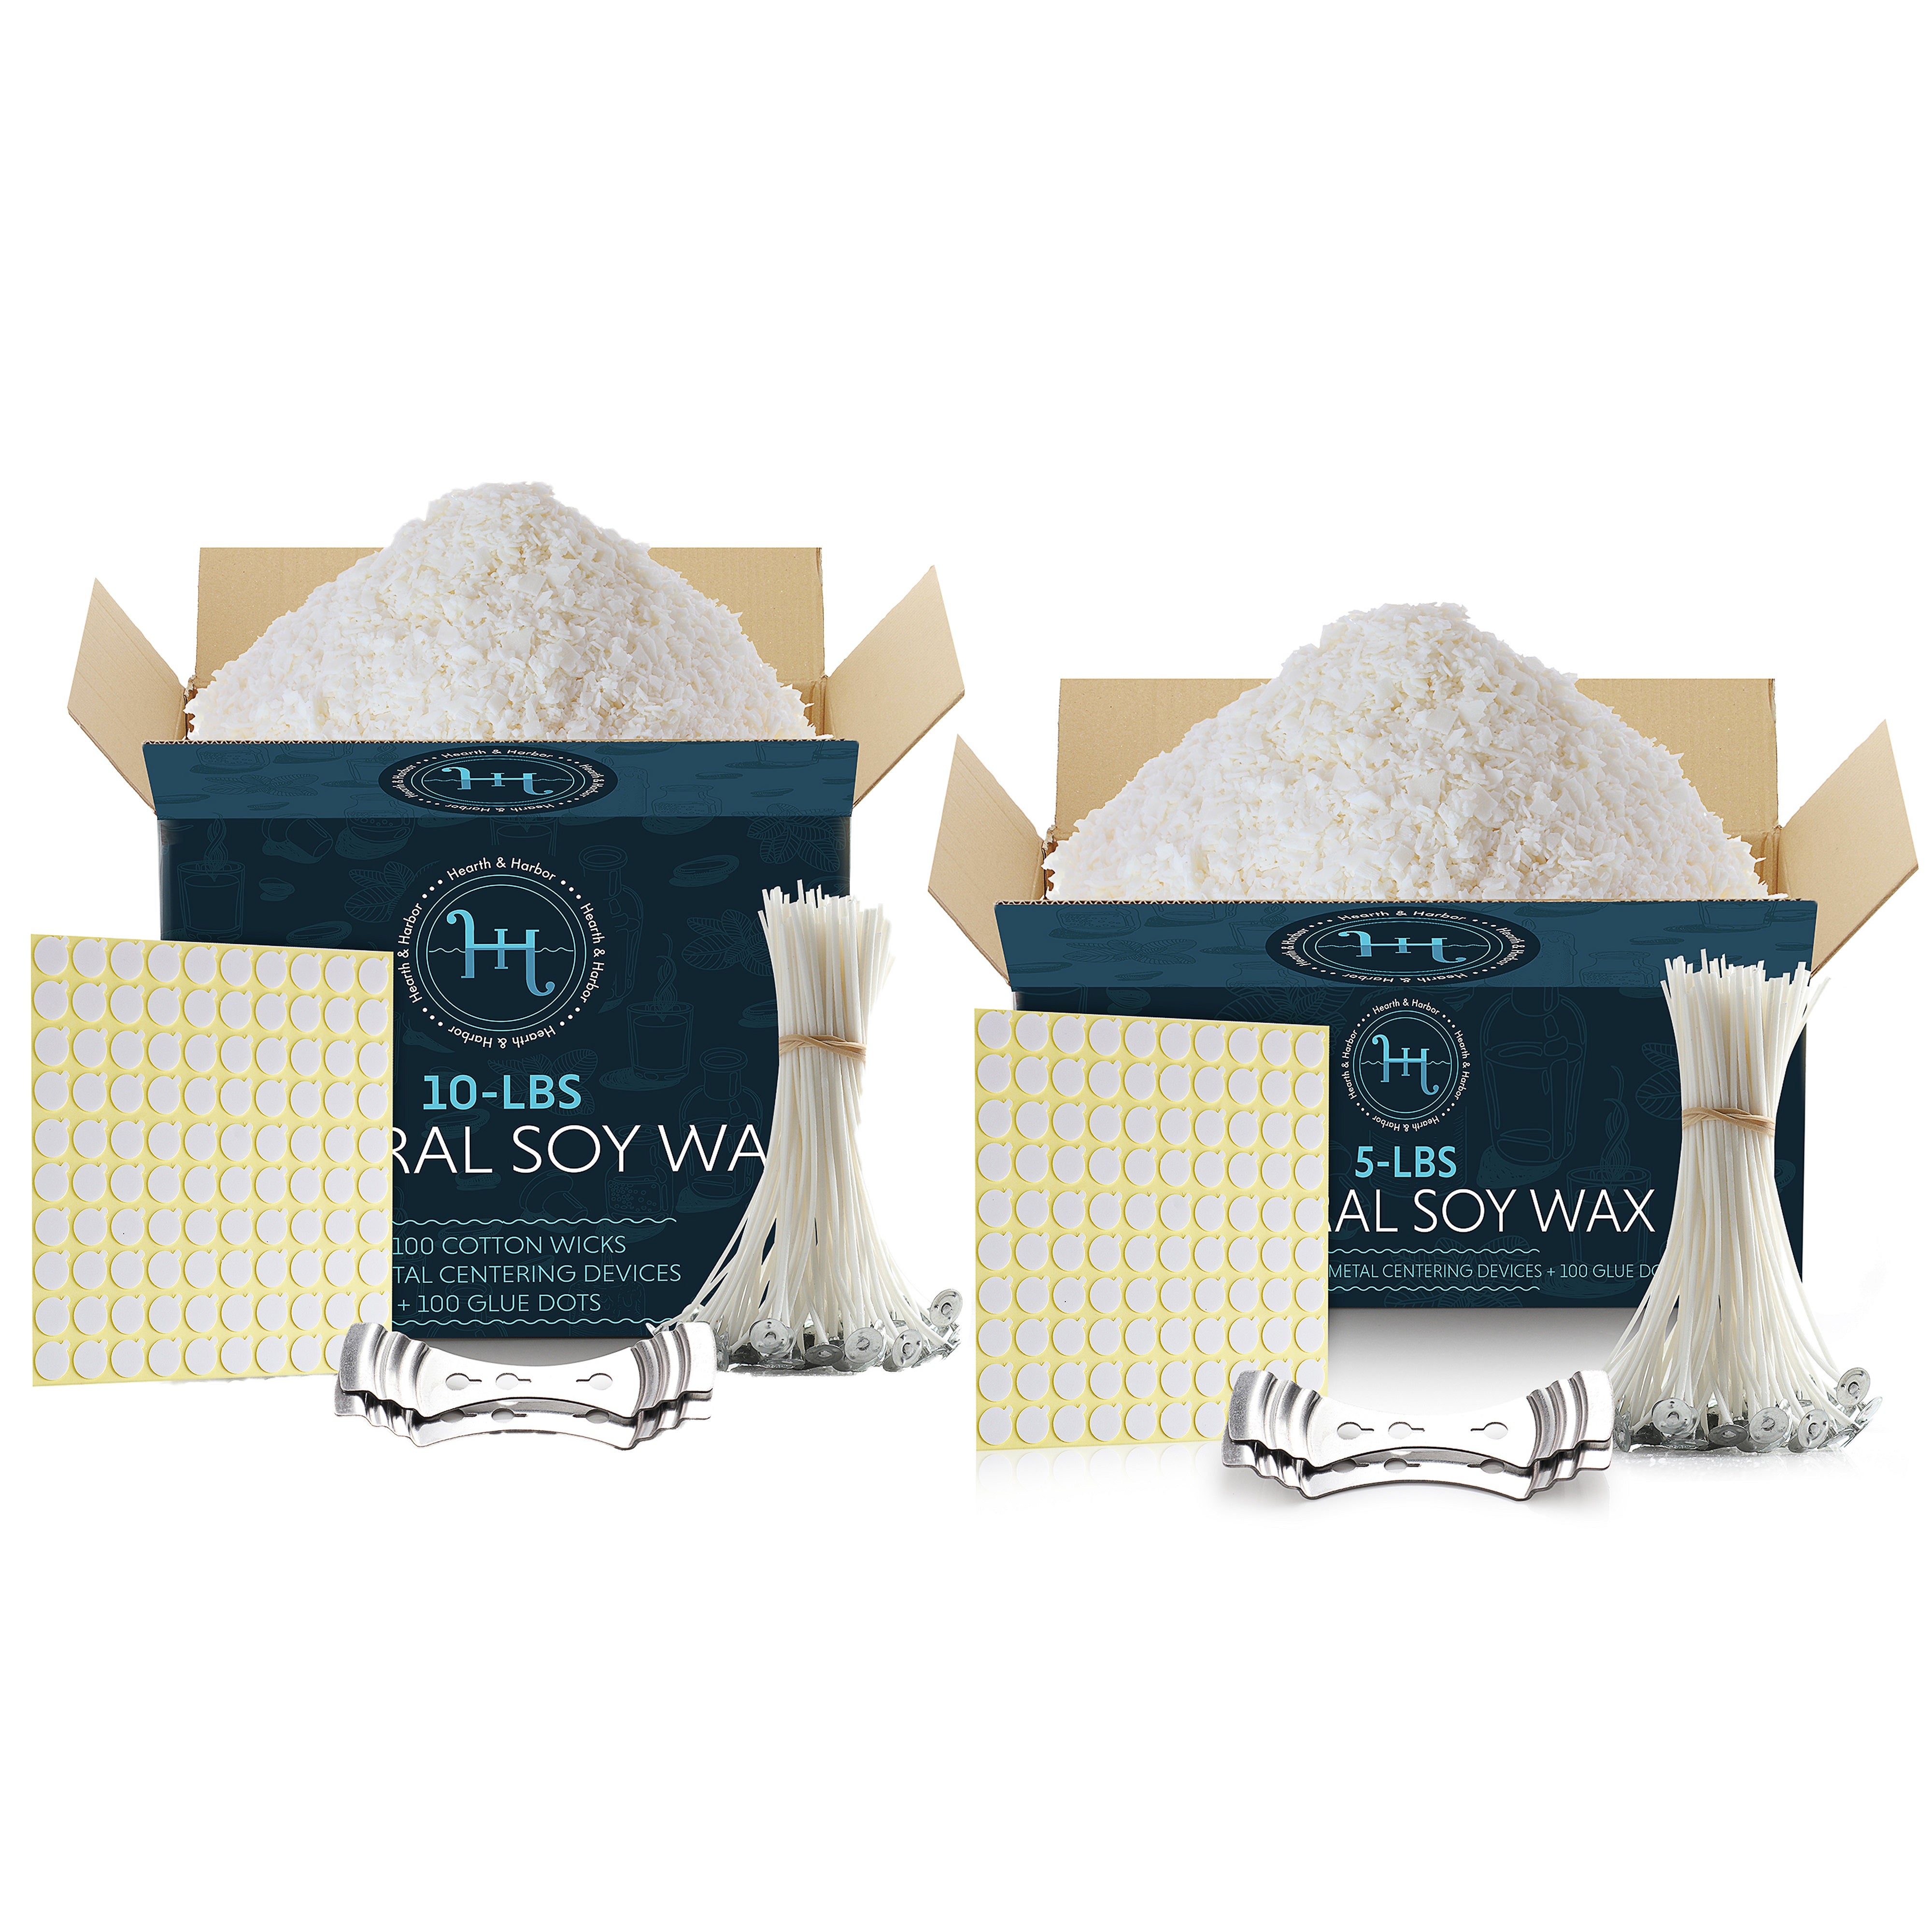 Hearth & Harbor DIY Candle Making Supplies, 10lb Soy Wax with Value Pack Accessories, White, Size: 11.00 inch x 8.30 inch x 8.00 inch